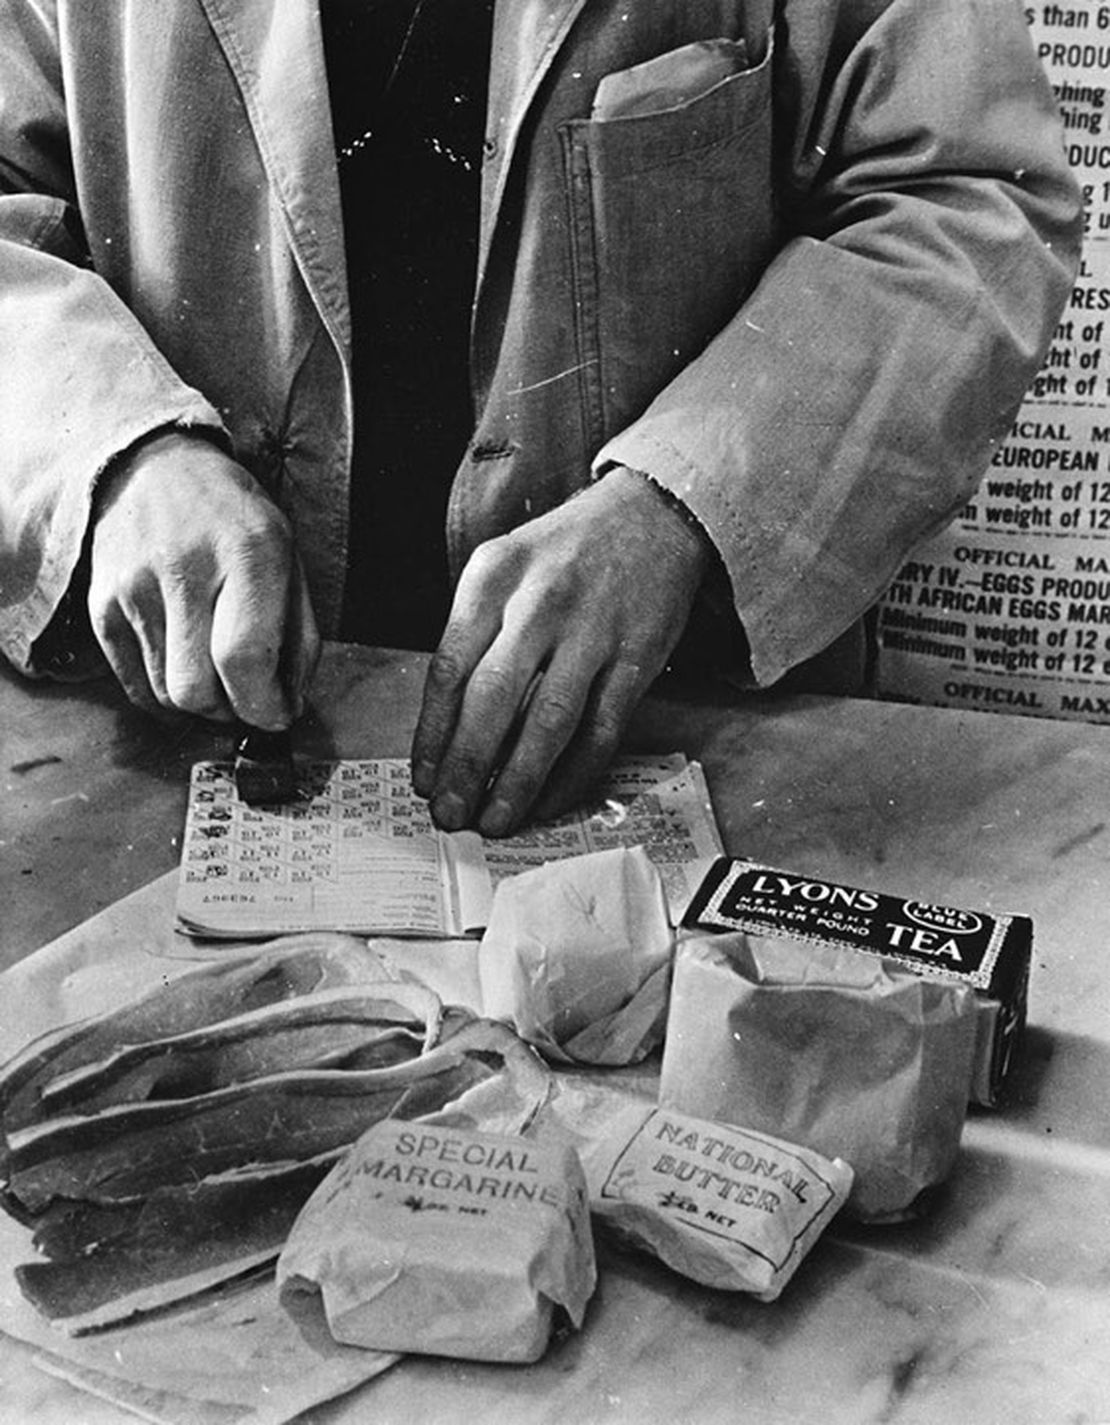 WW2 Rationing of chocolate and sweets finally ended